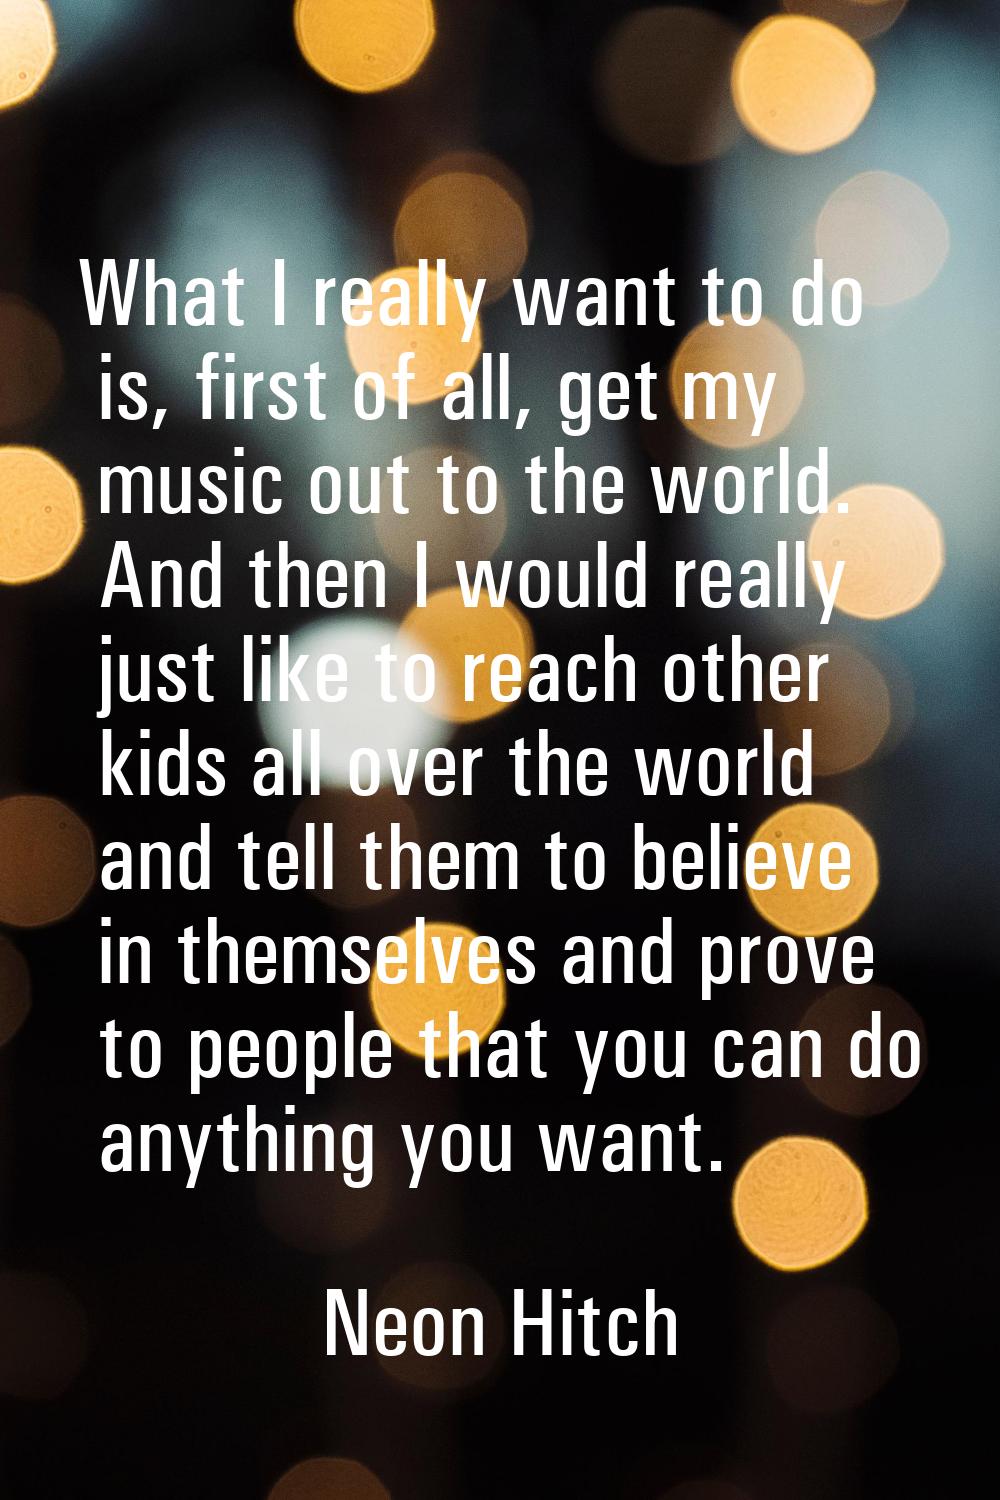 What I really want to do is, first of all, get my music out to the world. And then I would really j